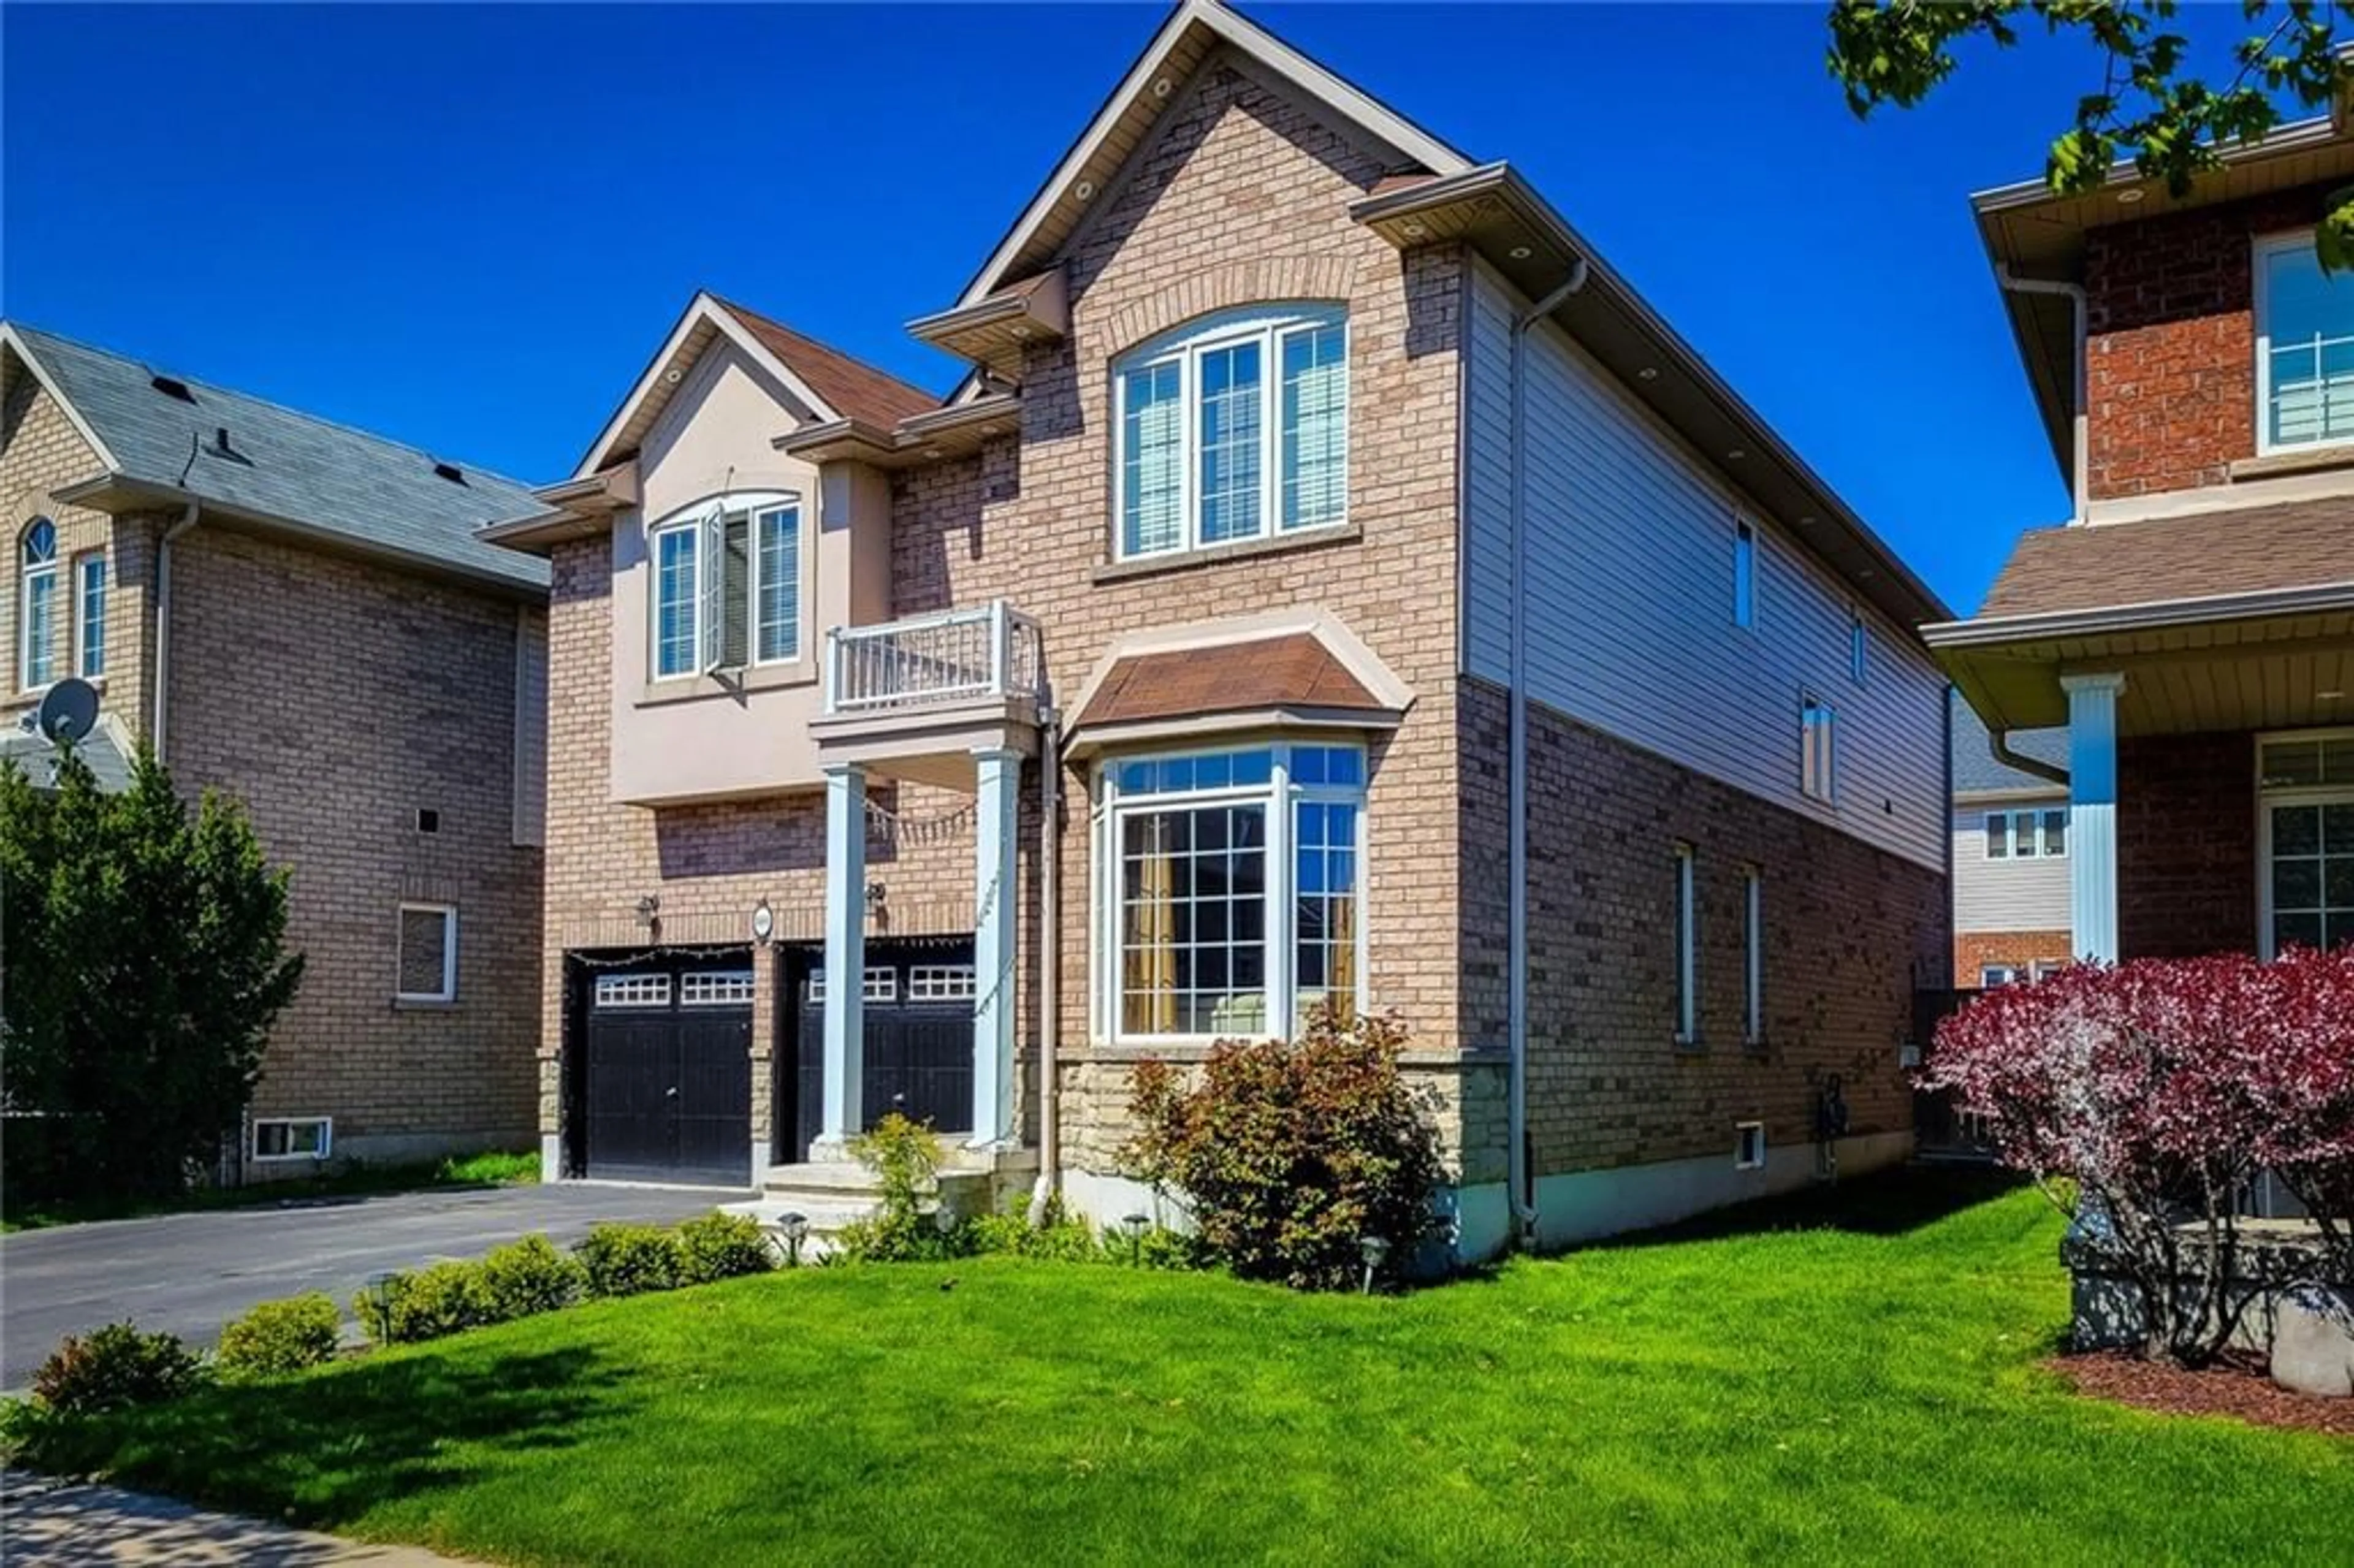 Home with brick exterior material for 189 Palacebeach Trail, Stoney Creek Ontario L8E 0C2